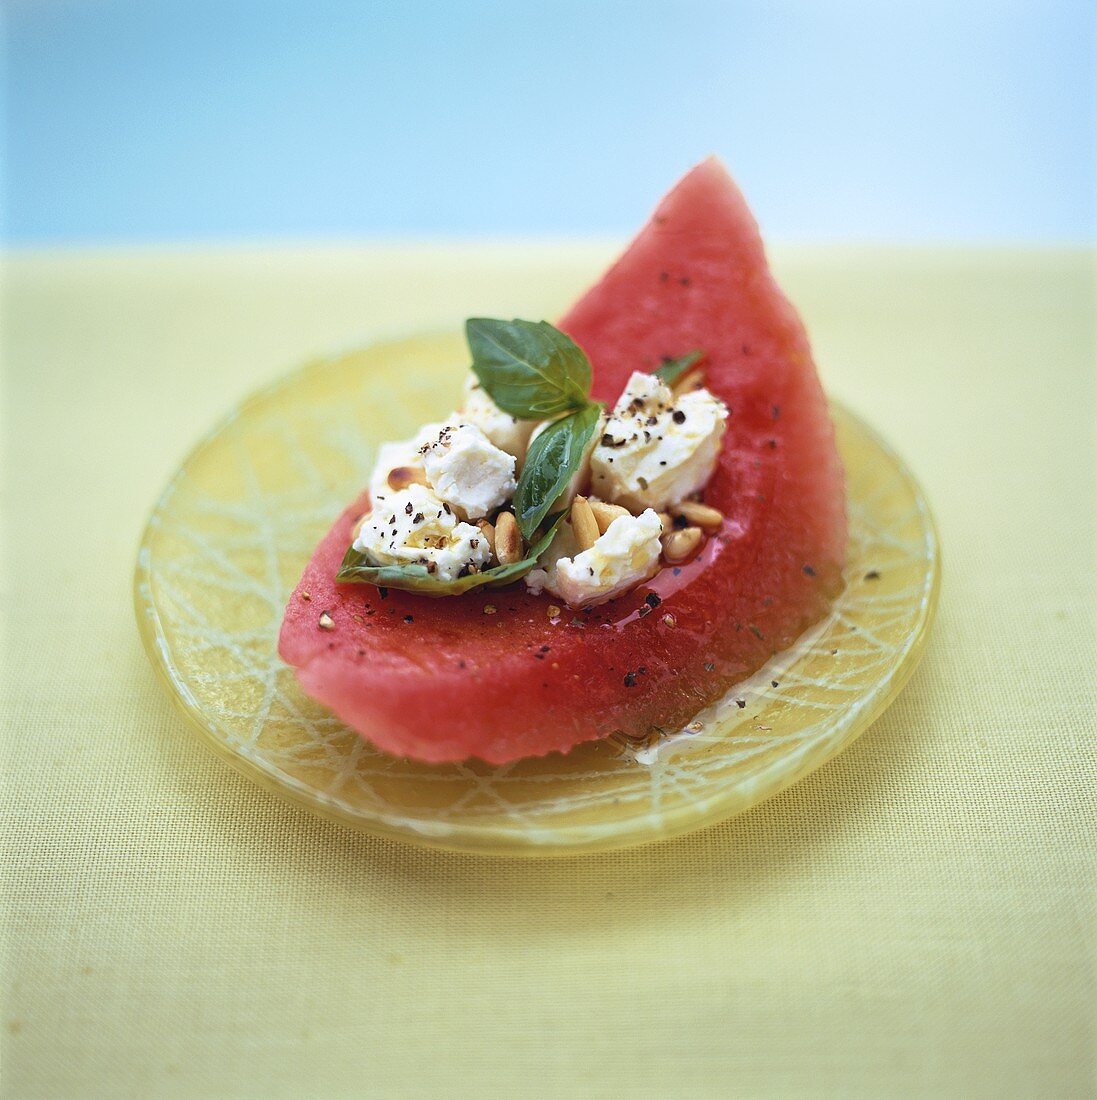 Watermelon with sheep's cheese and pine nuts